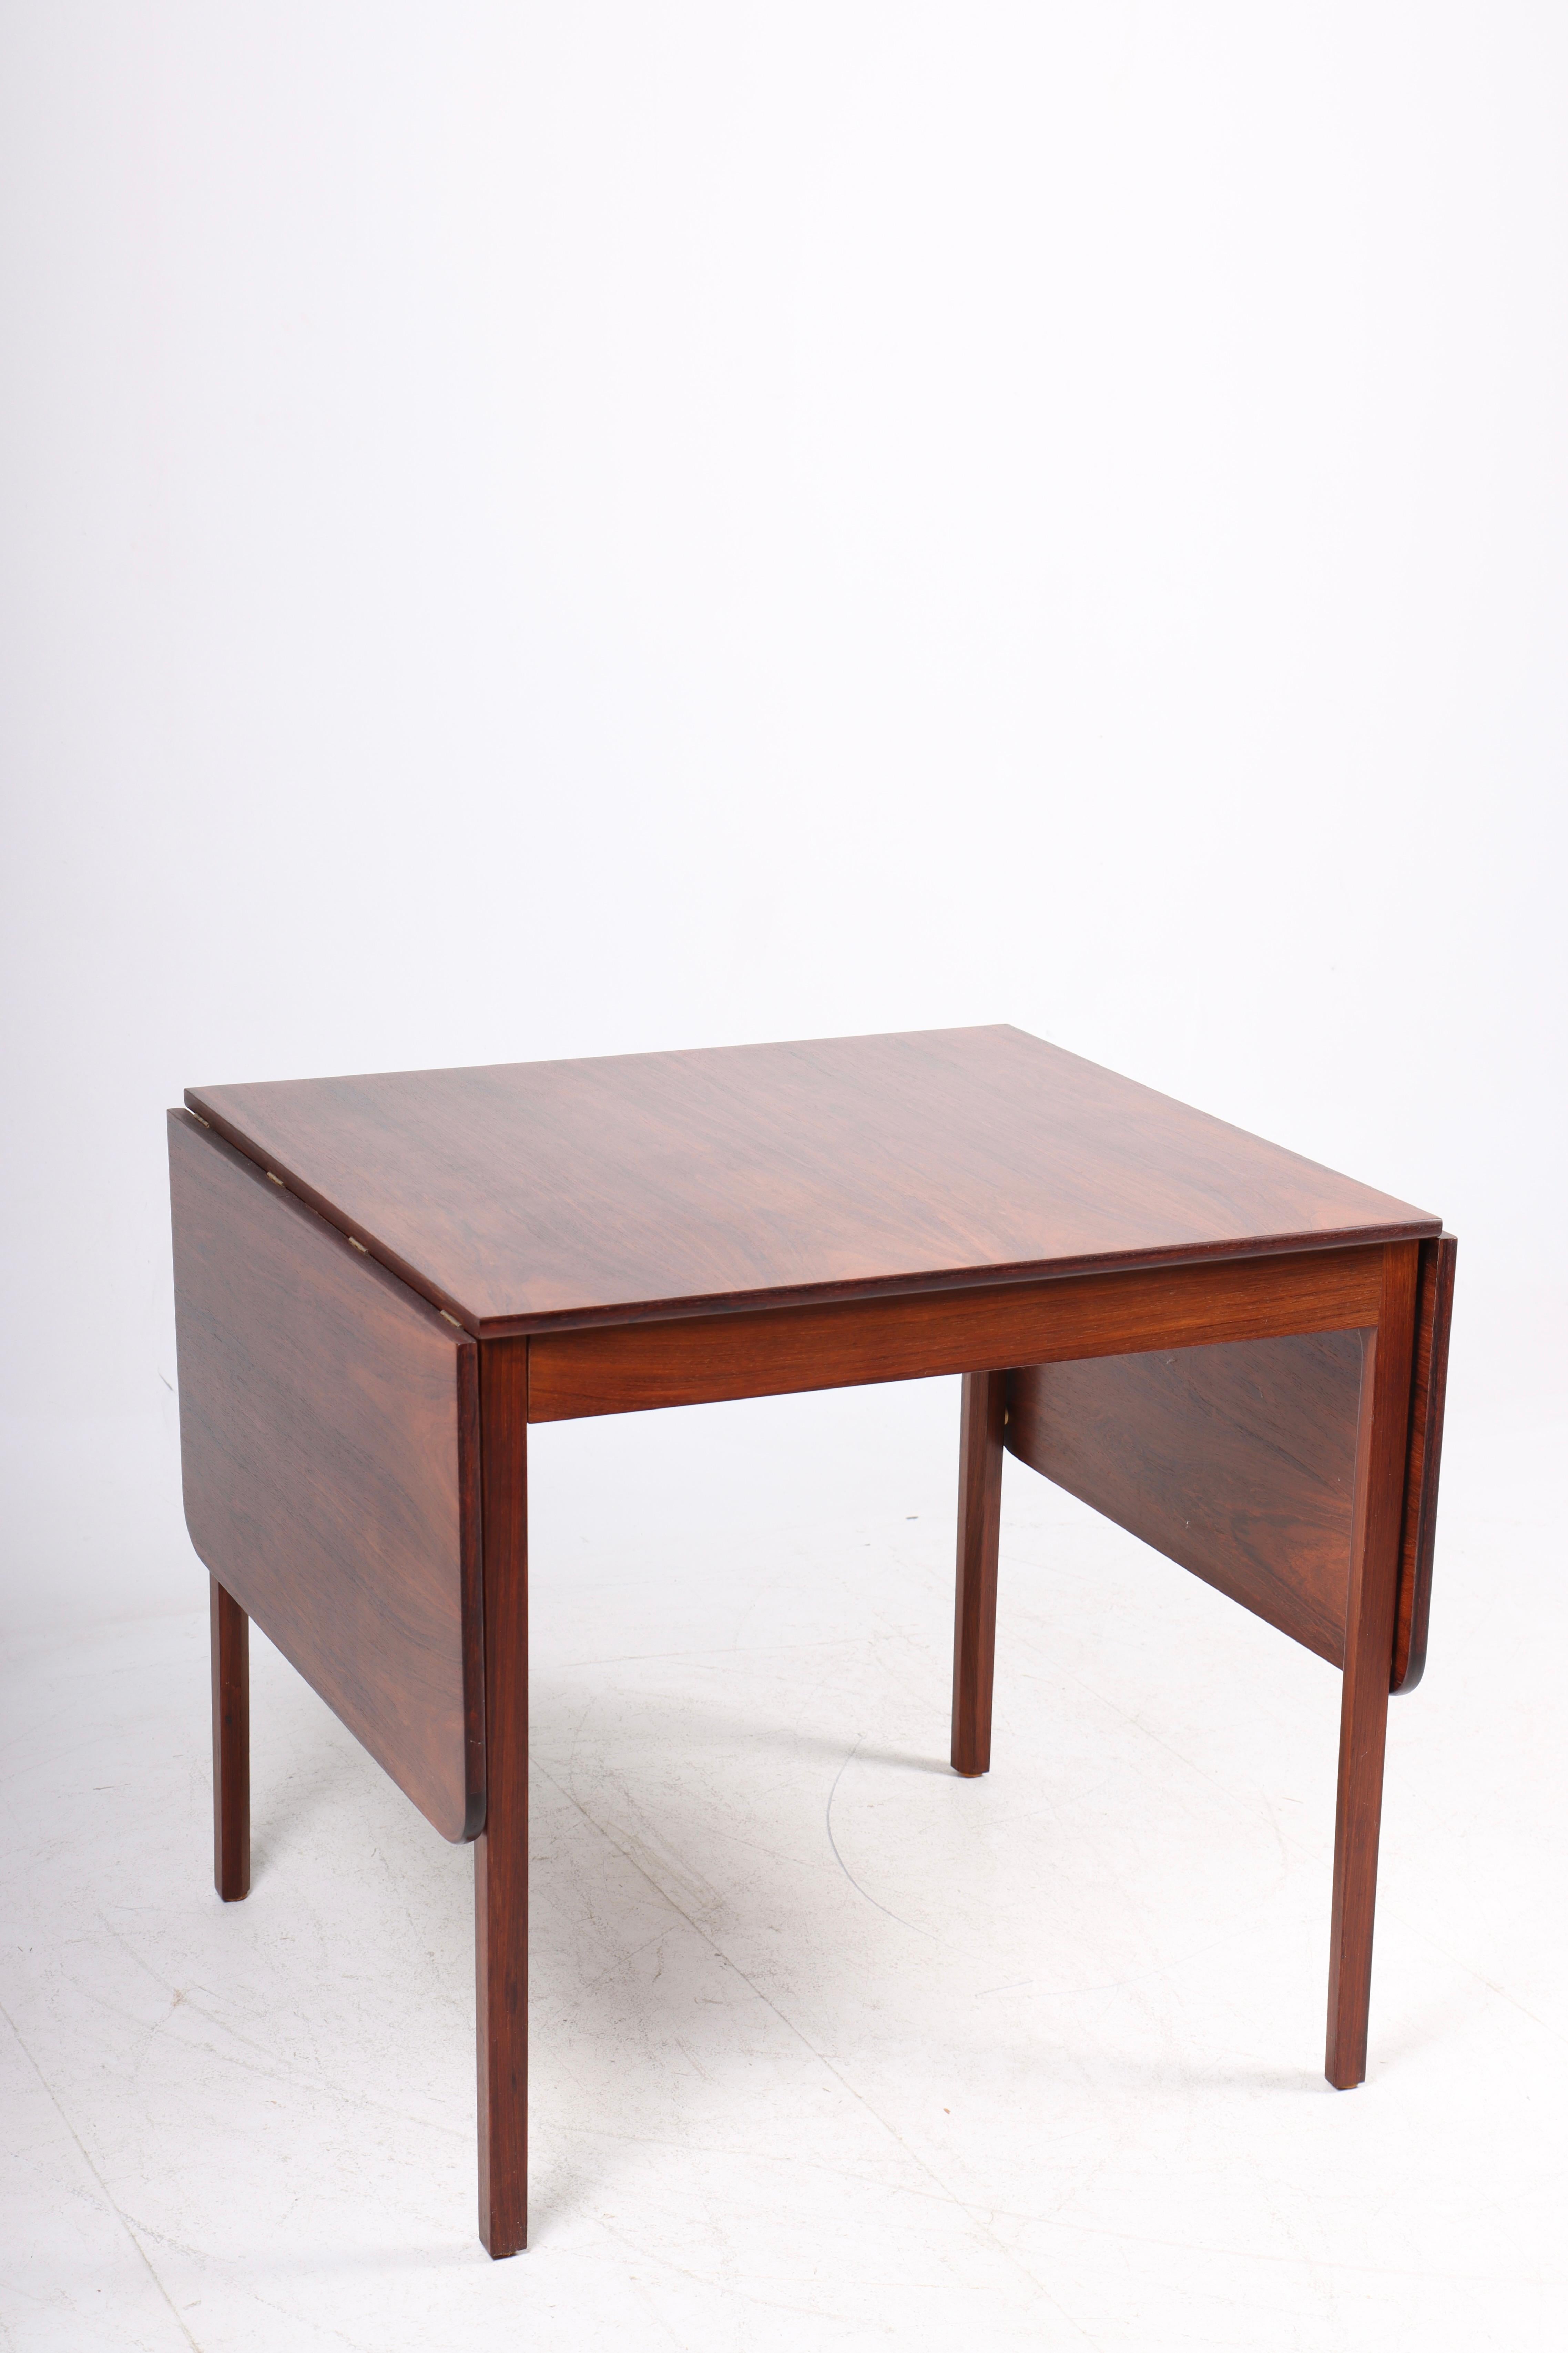 Dining table in rosewood. Designed by Ole Wanscher for A.J.Iversen cabinetmakers. Made in Denmark, 1960s. Great original condition.
Total width: 163 cm.